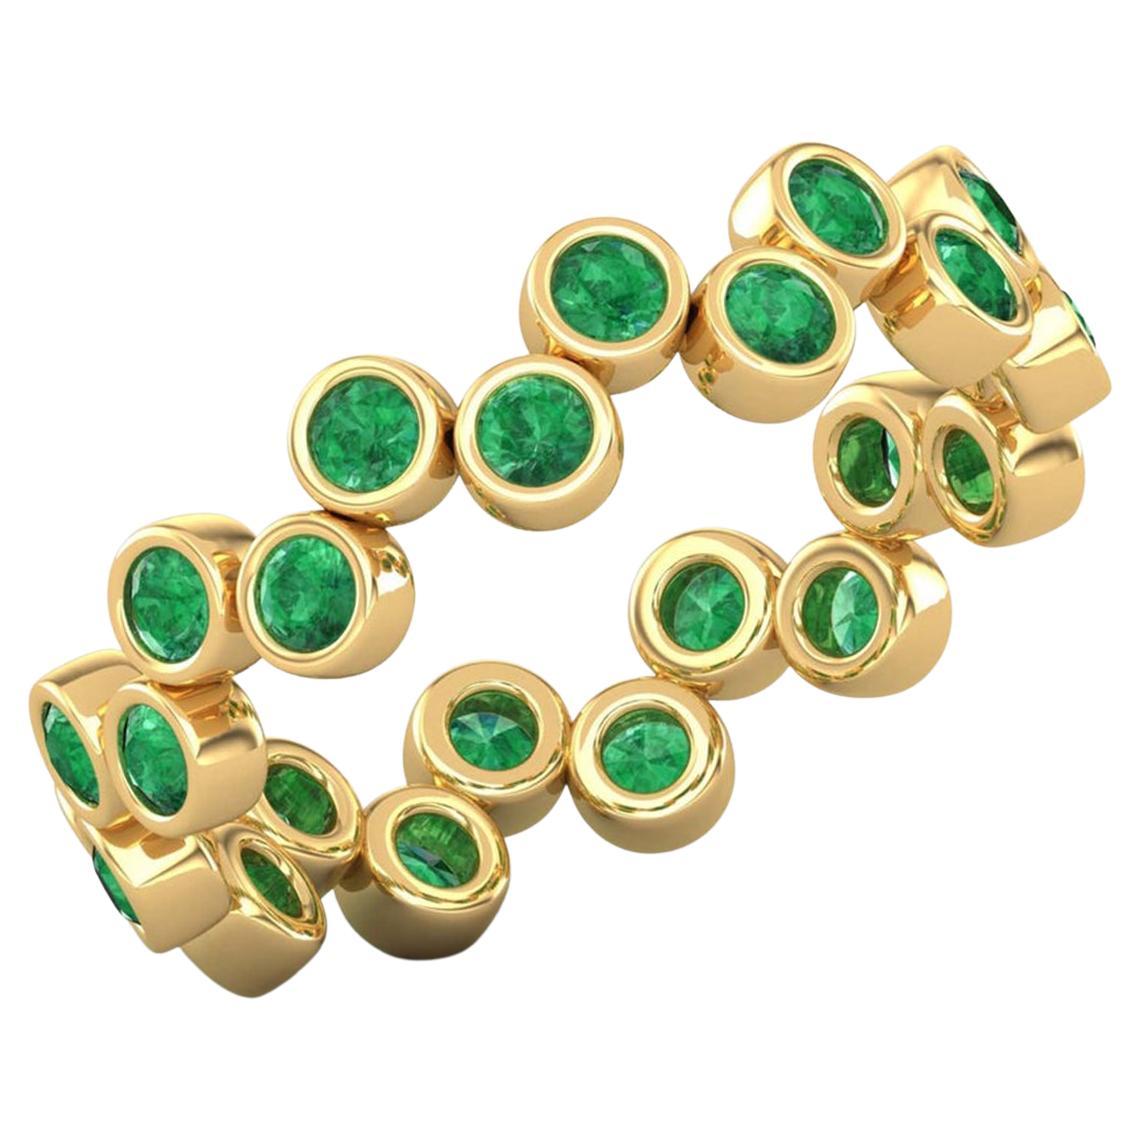 14 Karat Gold Round Cut Emerald Ring / Gold Engagement Ring / Ring for Her For Sale